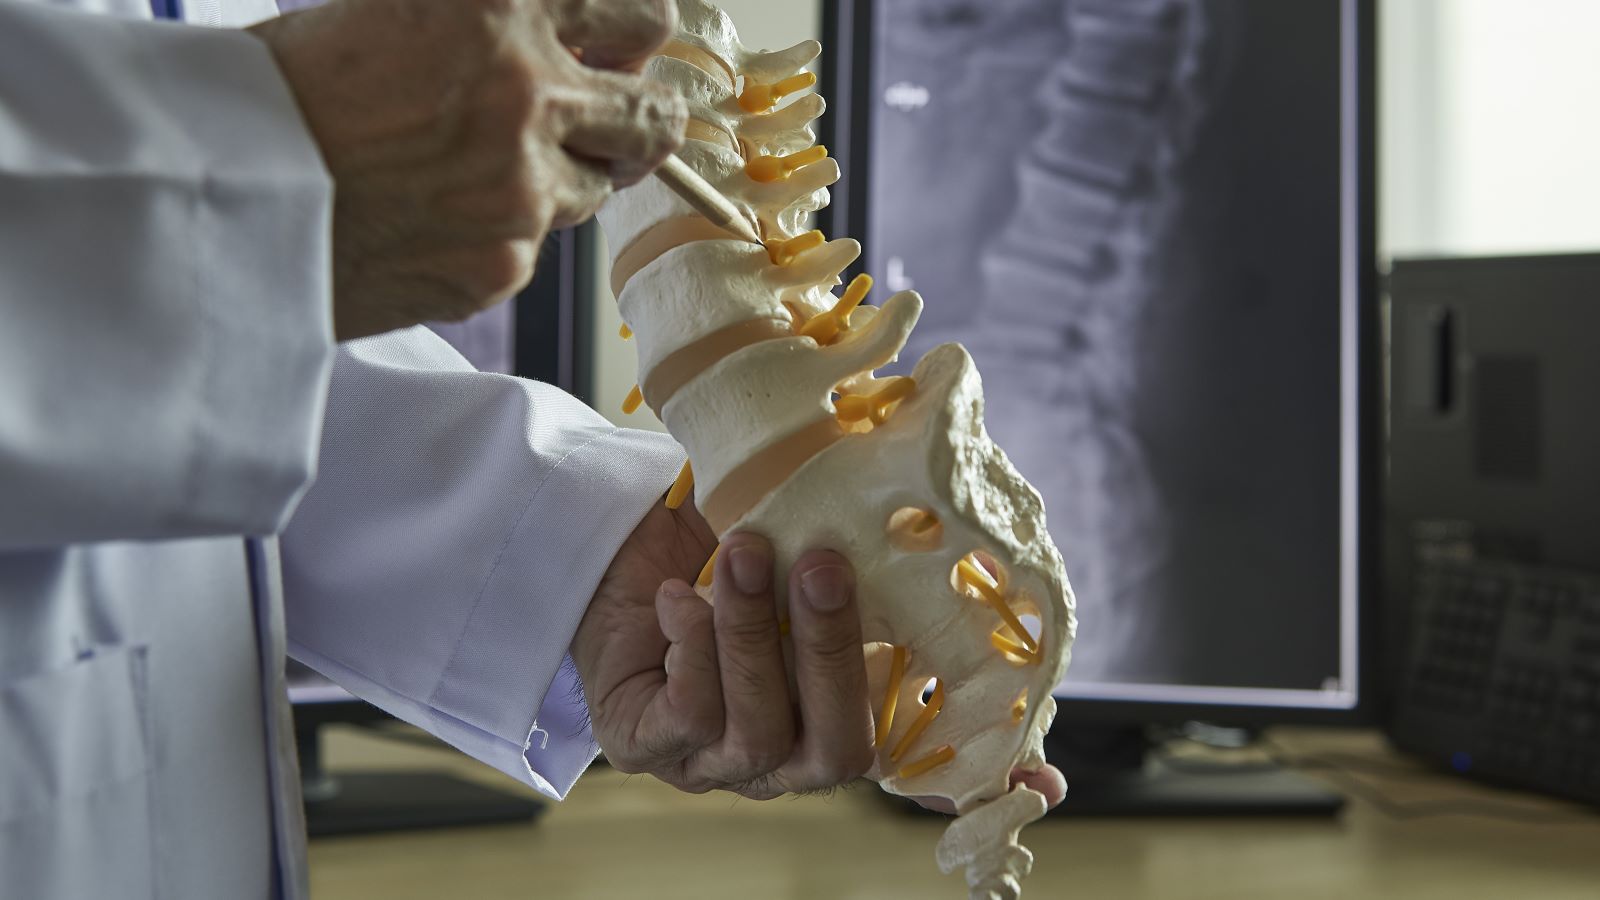 Thinking About Spine Surgery? Here Are 5 Things to Know